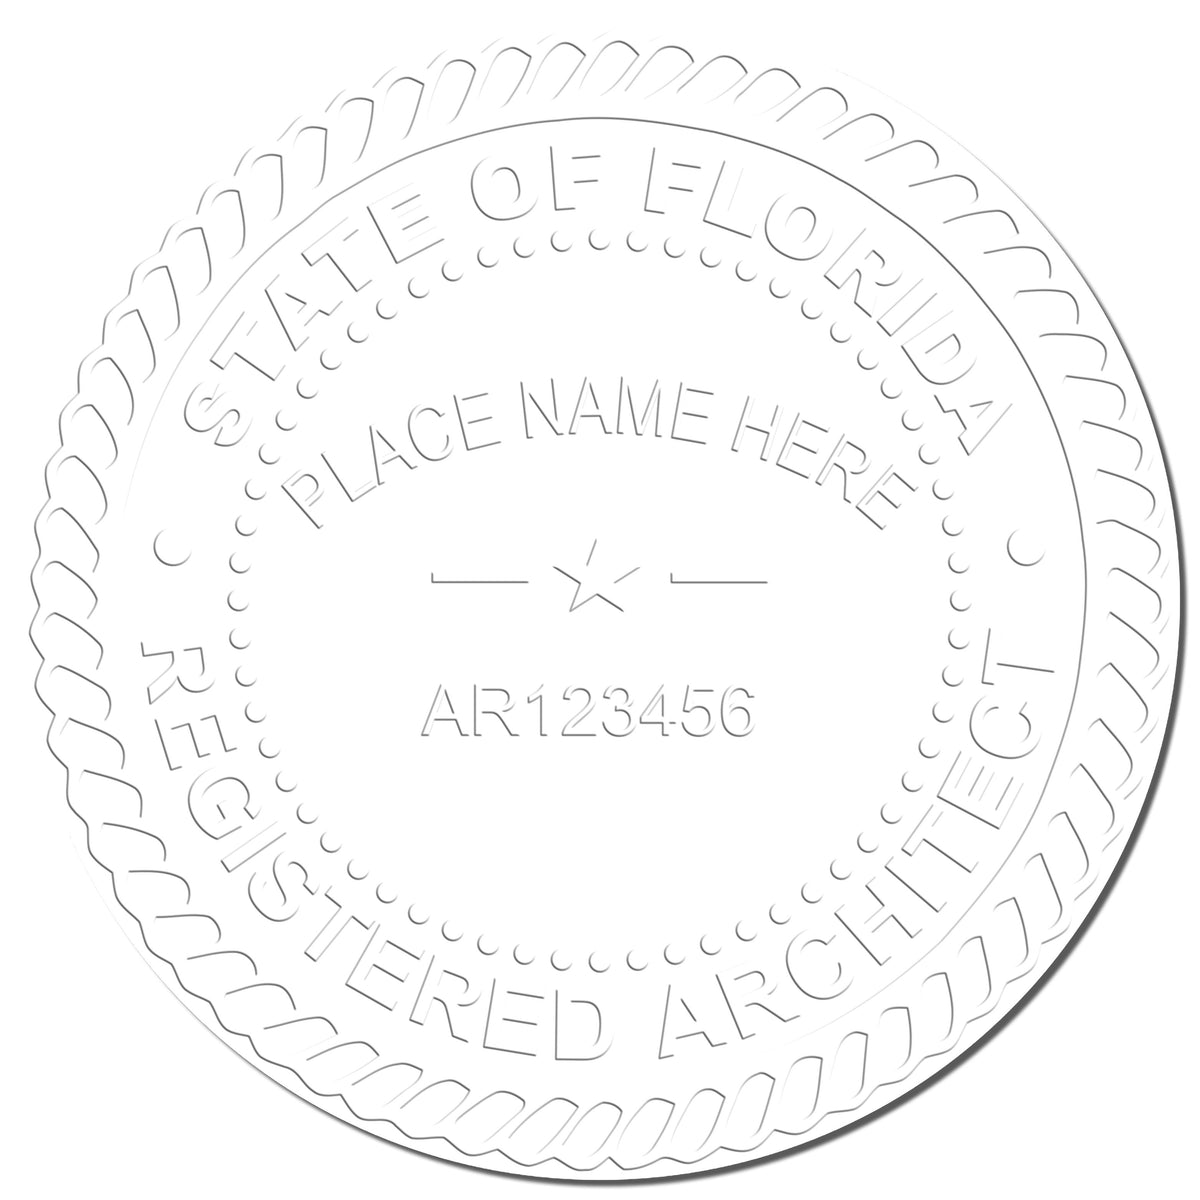 This paper is stamped with a sample imprint of the Hybrid Florida Architect Seal, signifying its quality and reliability.